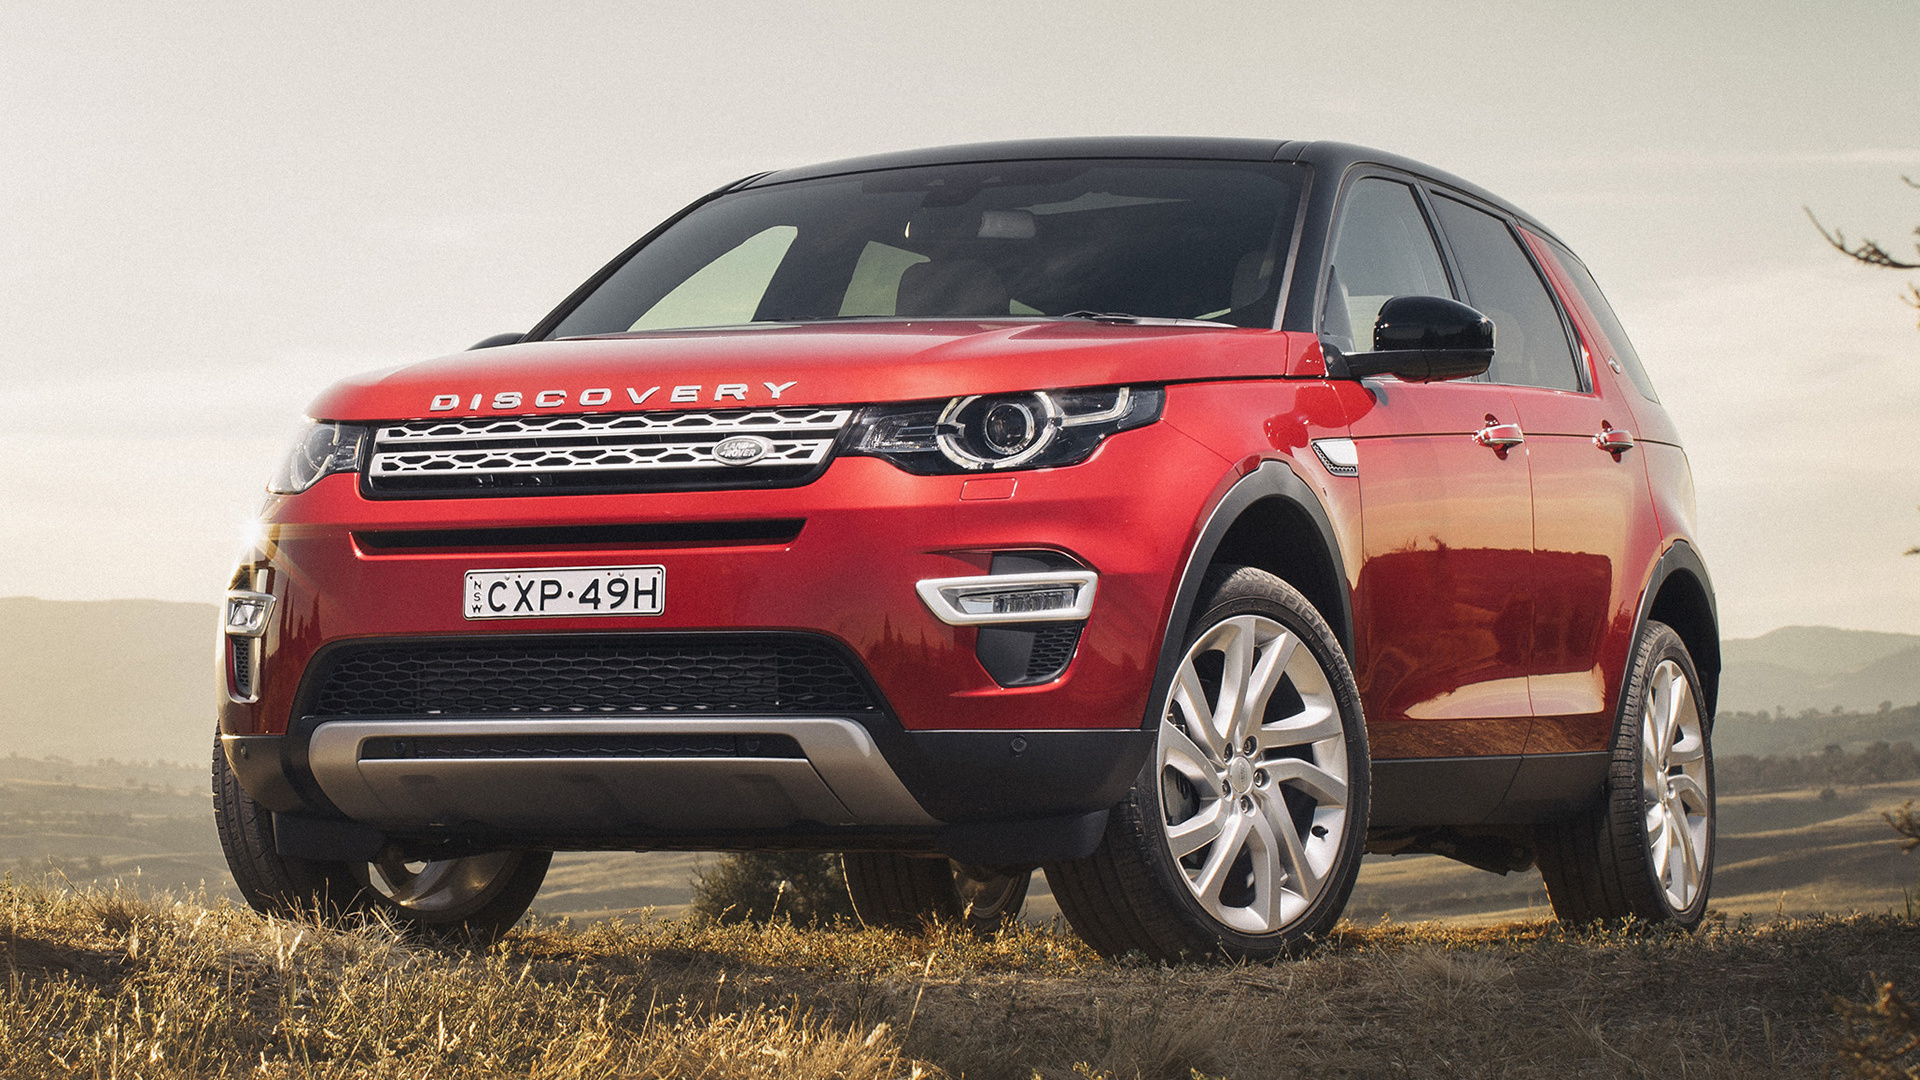 Car Crossover Car Land Rover Discovery Sport Hse Luxury Luxury Car Red Car Suv Subcompact Car 1920x1080